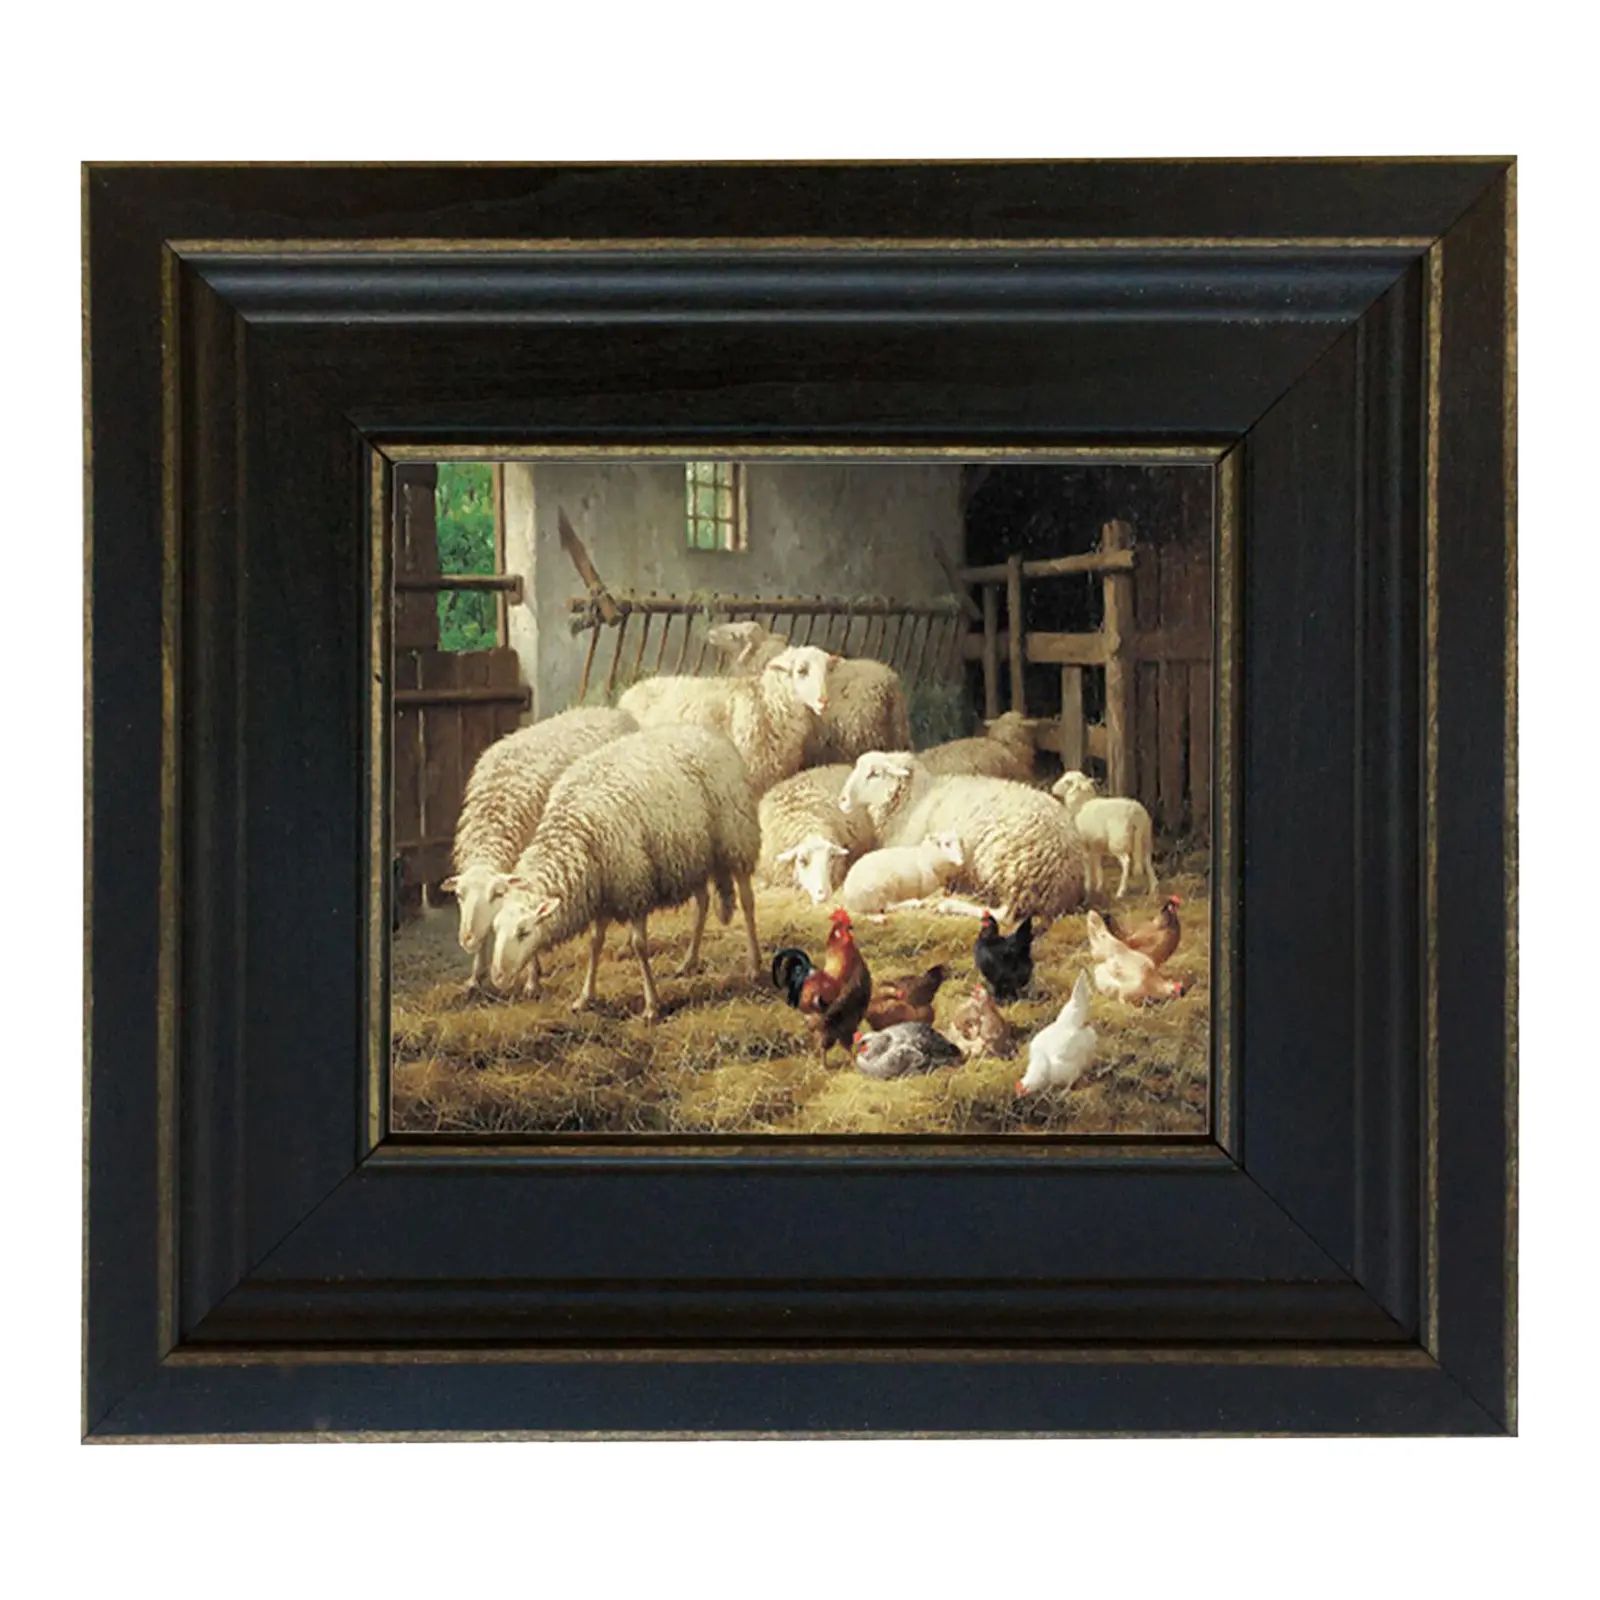 Sheep and Chickens Framed Oil Painting Reproduction Print on Canvas | Chairish